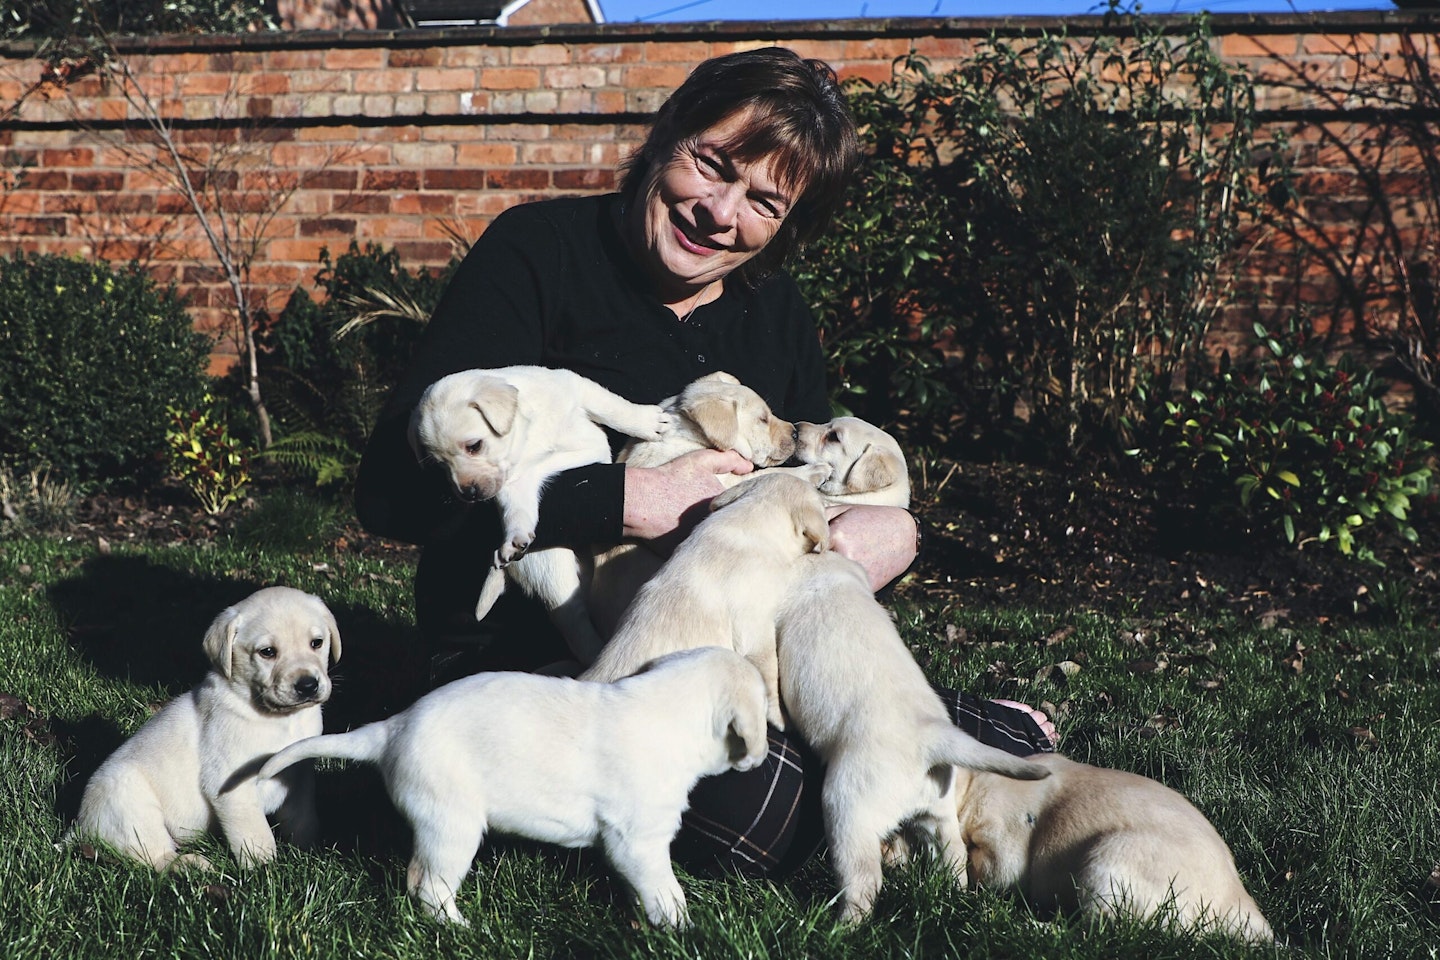 Me with the puppies